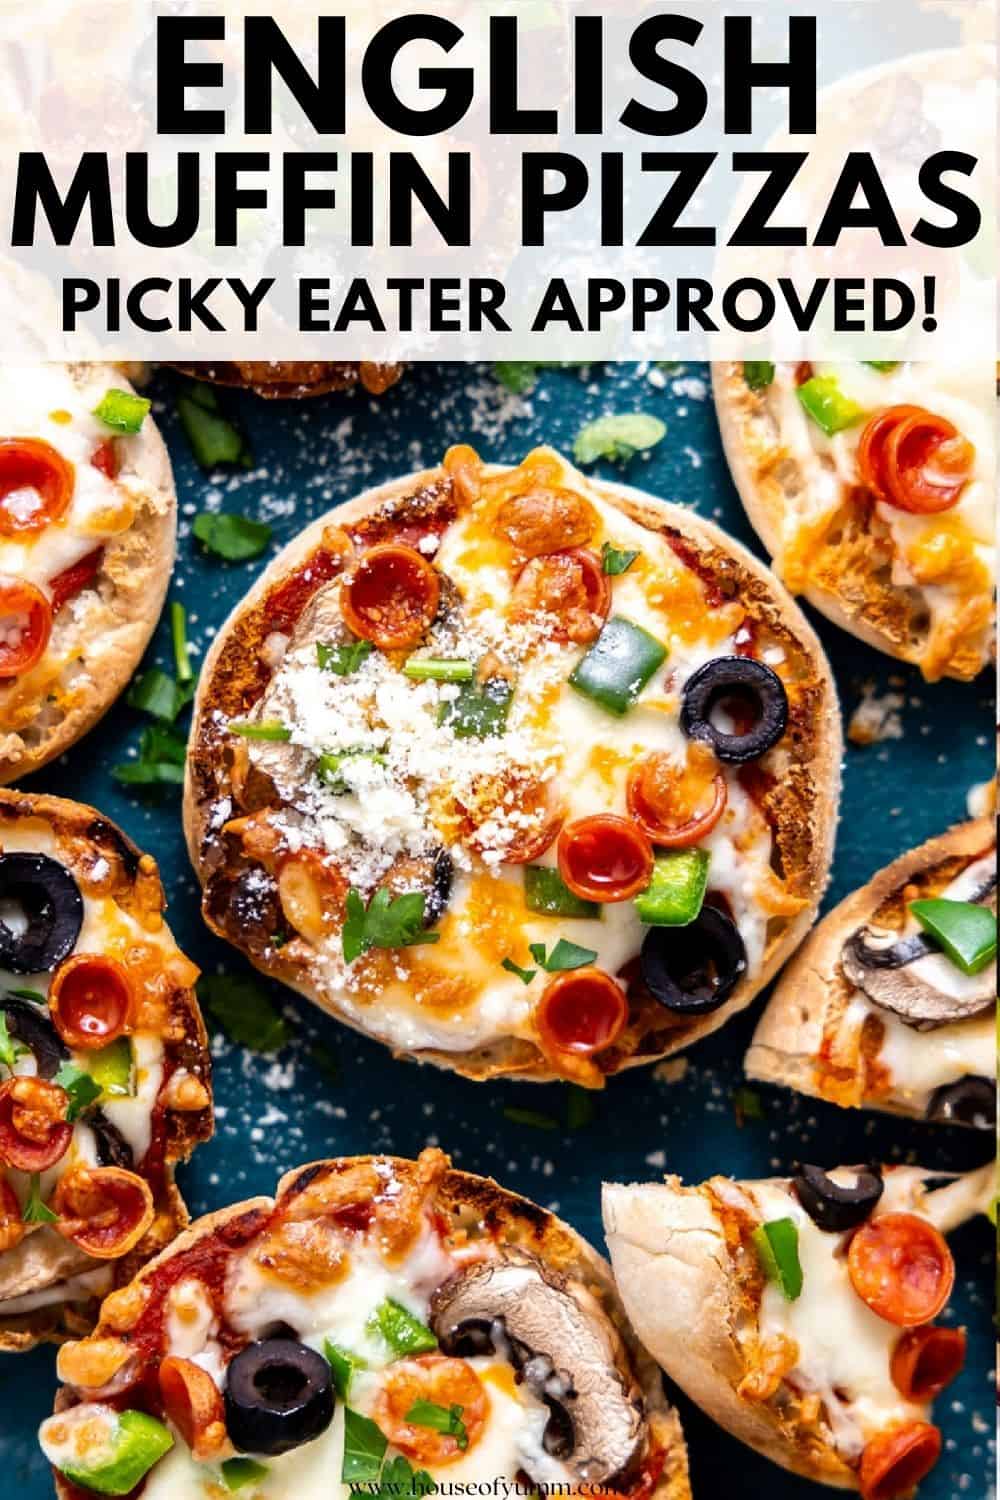 English Muffin Pizza with text.